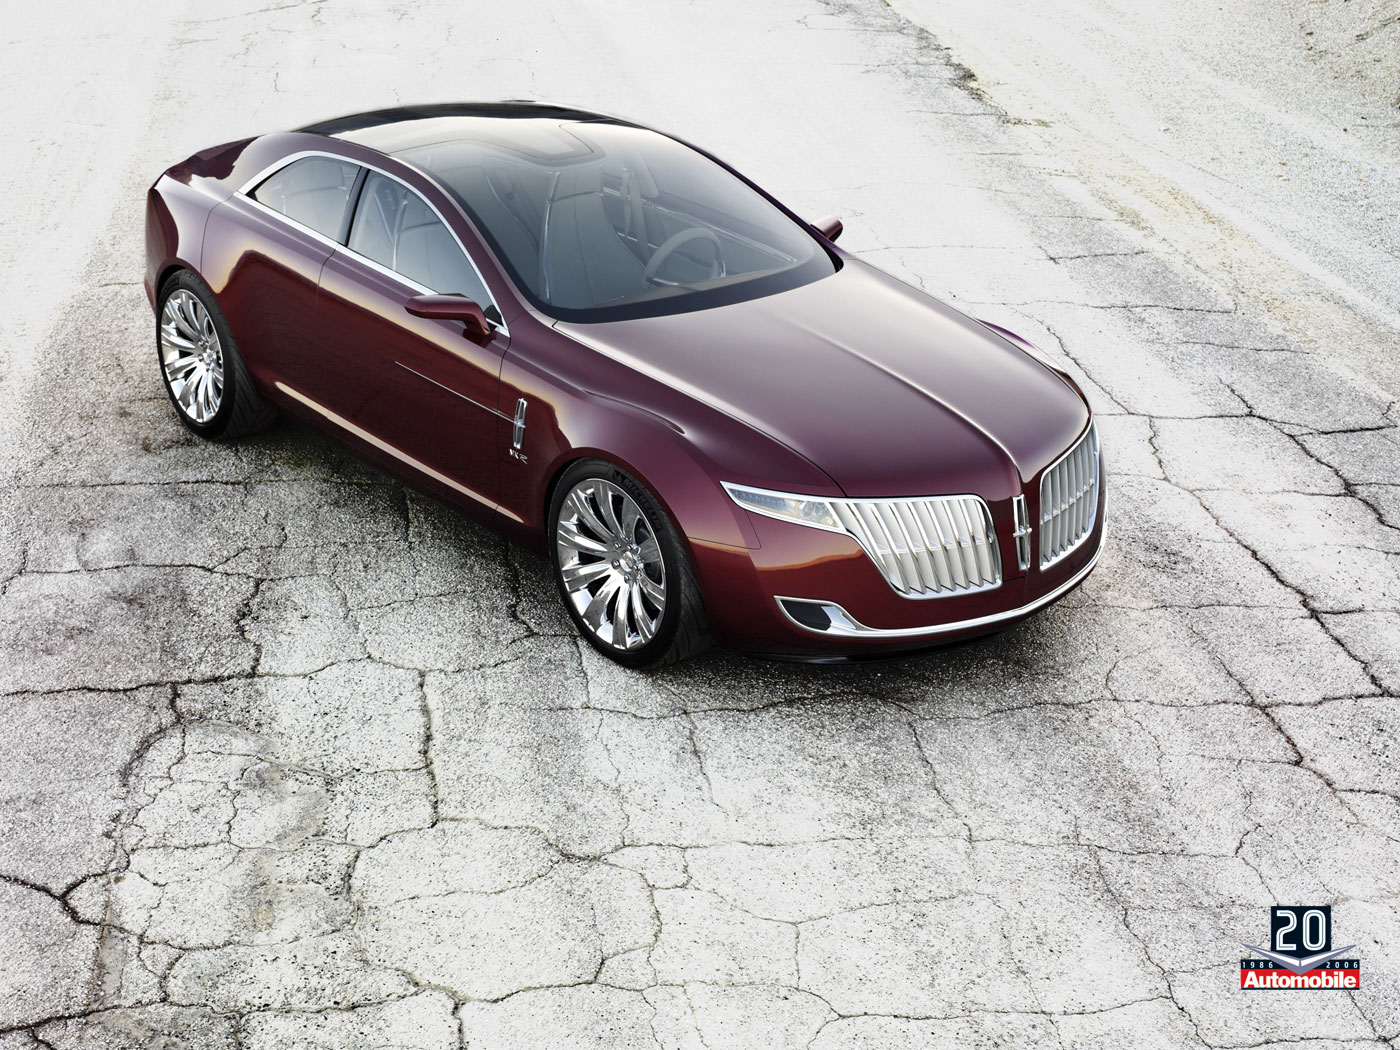  Lincoln MKR Concept